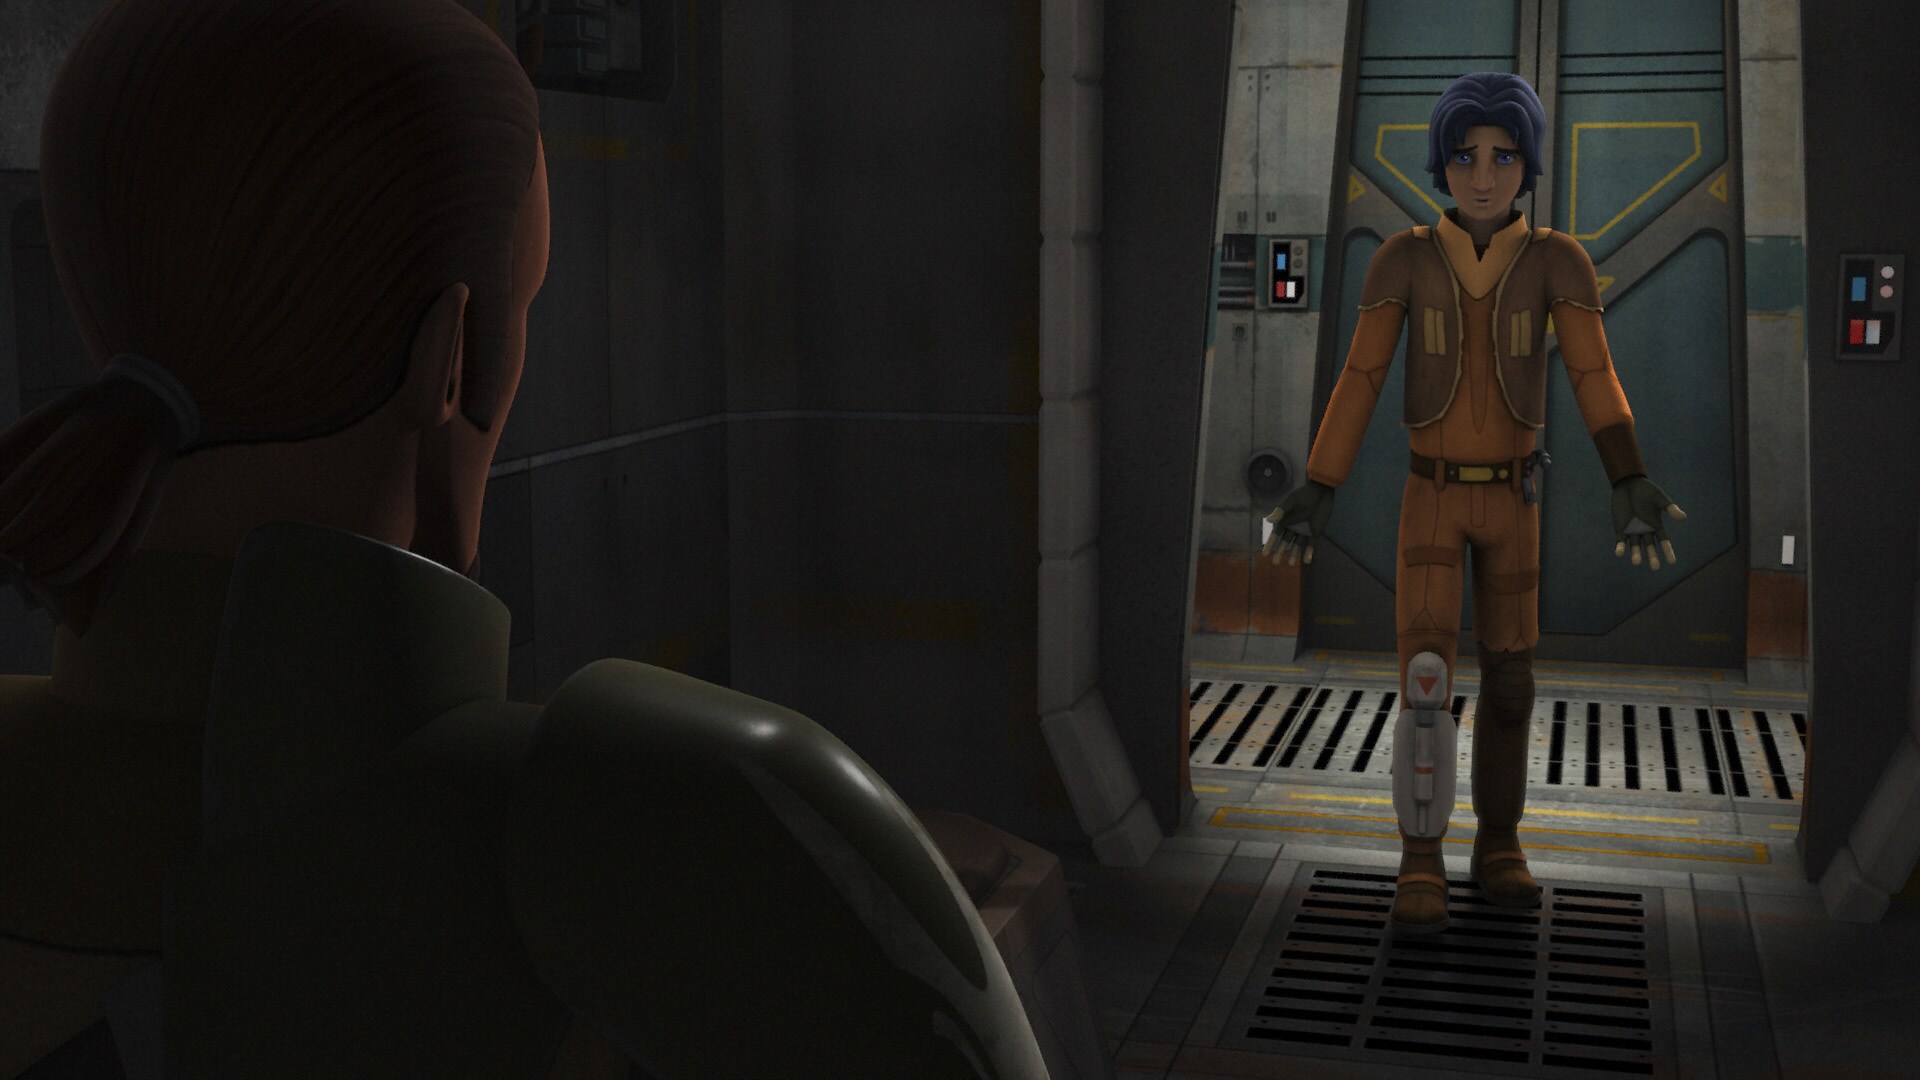 After Ezra's dangerous connection with the dark side, Kanan prepares a new challenge for him, mea...